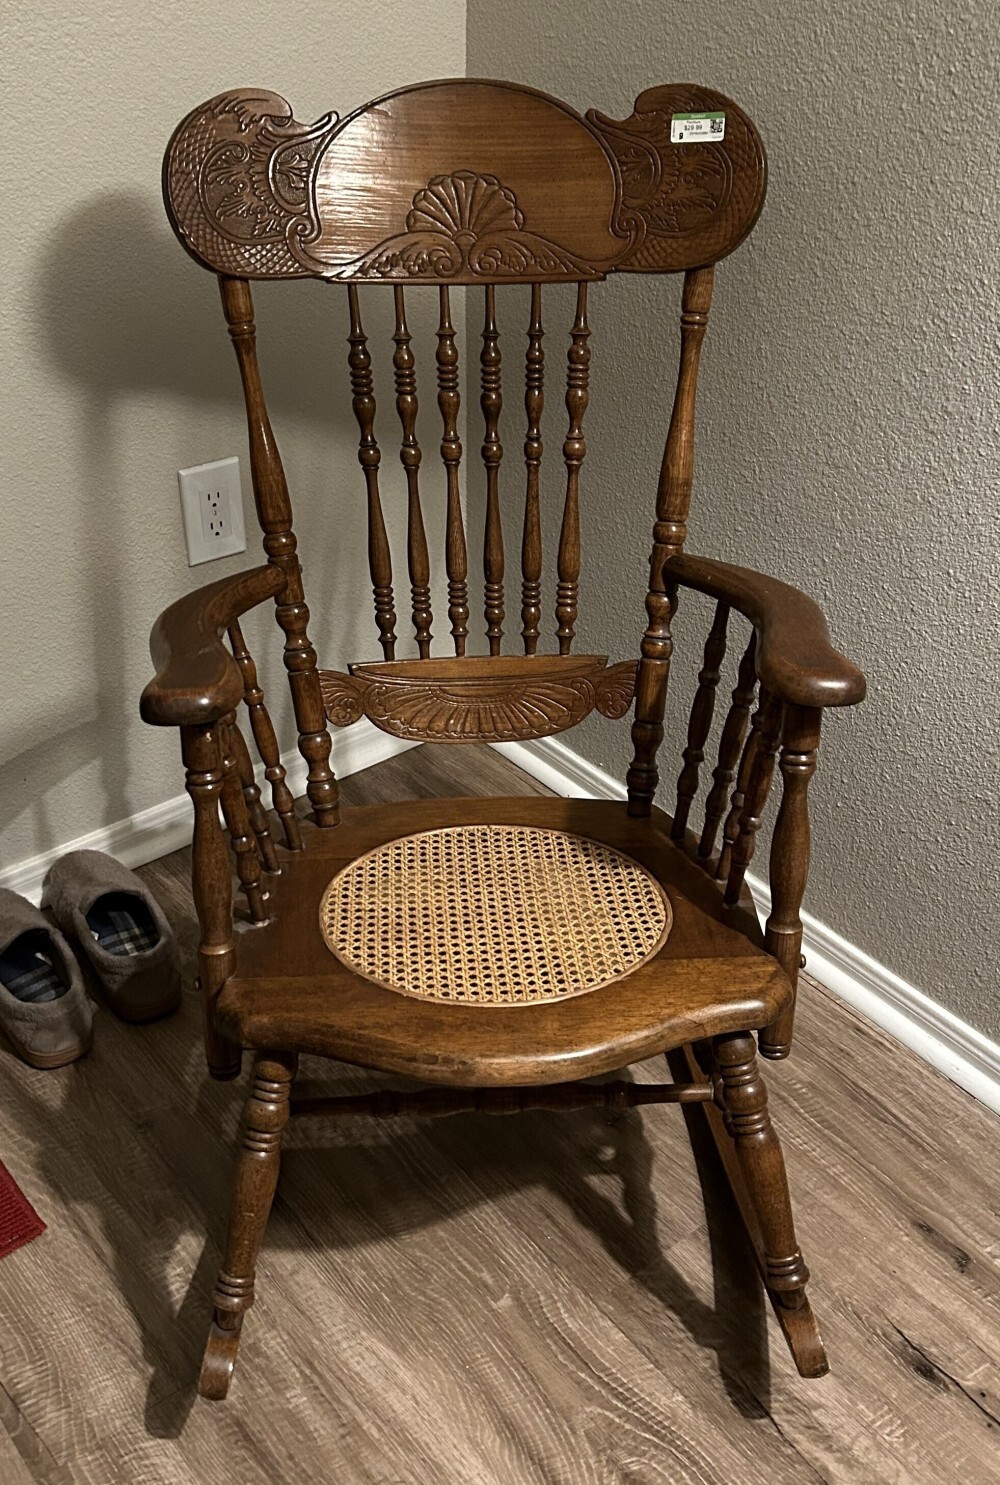 a wobbly rocking chair from a local thrift store.